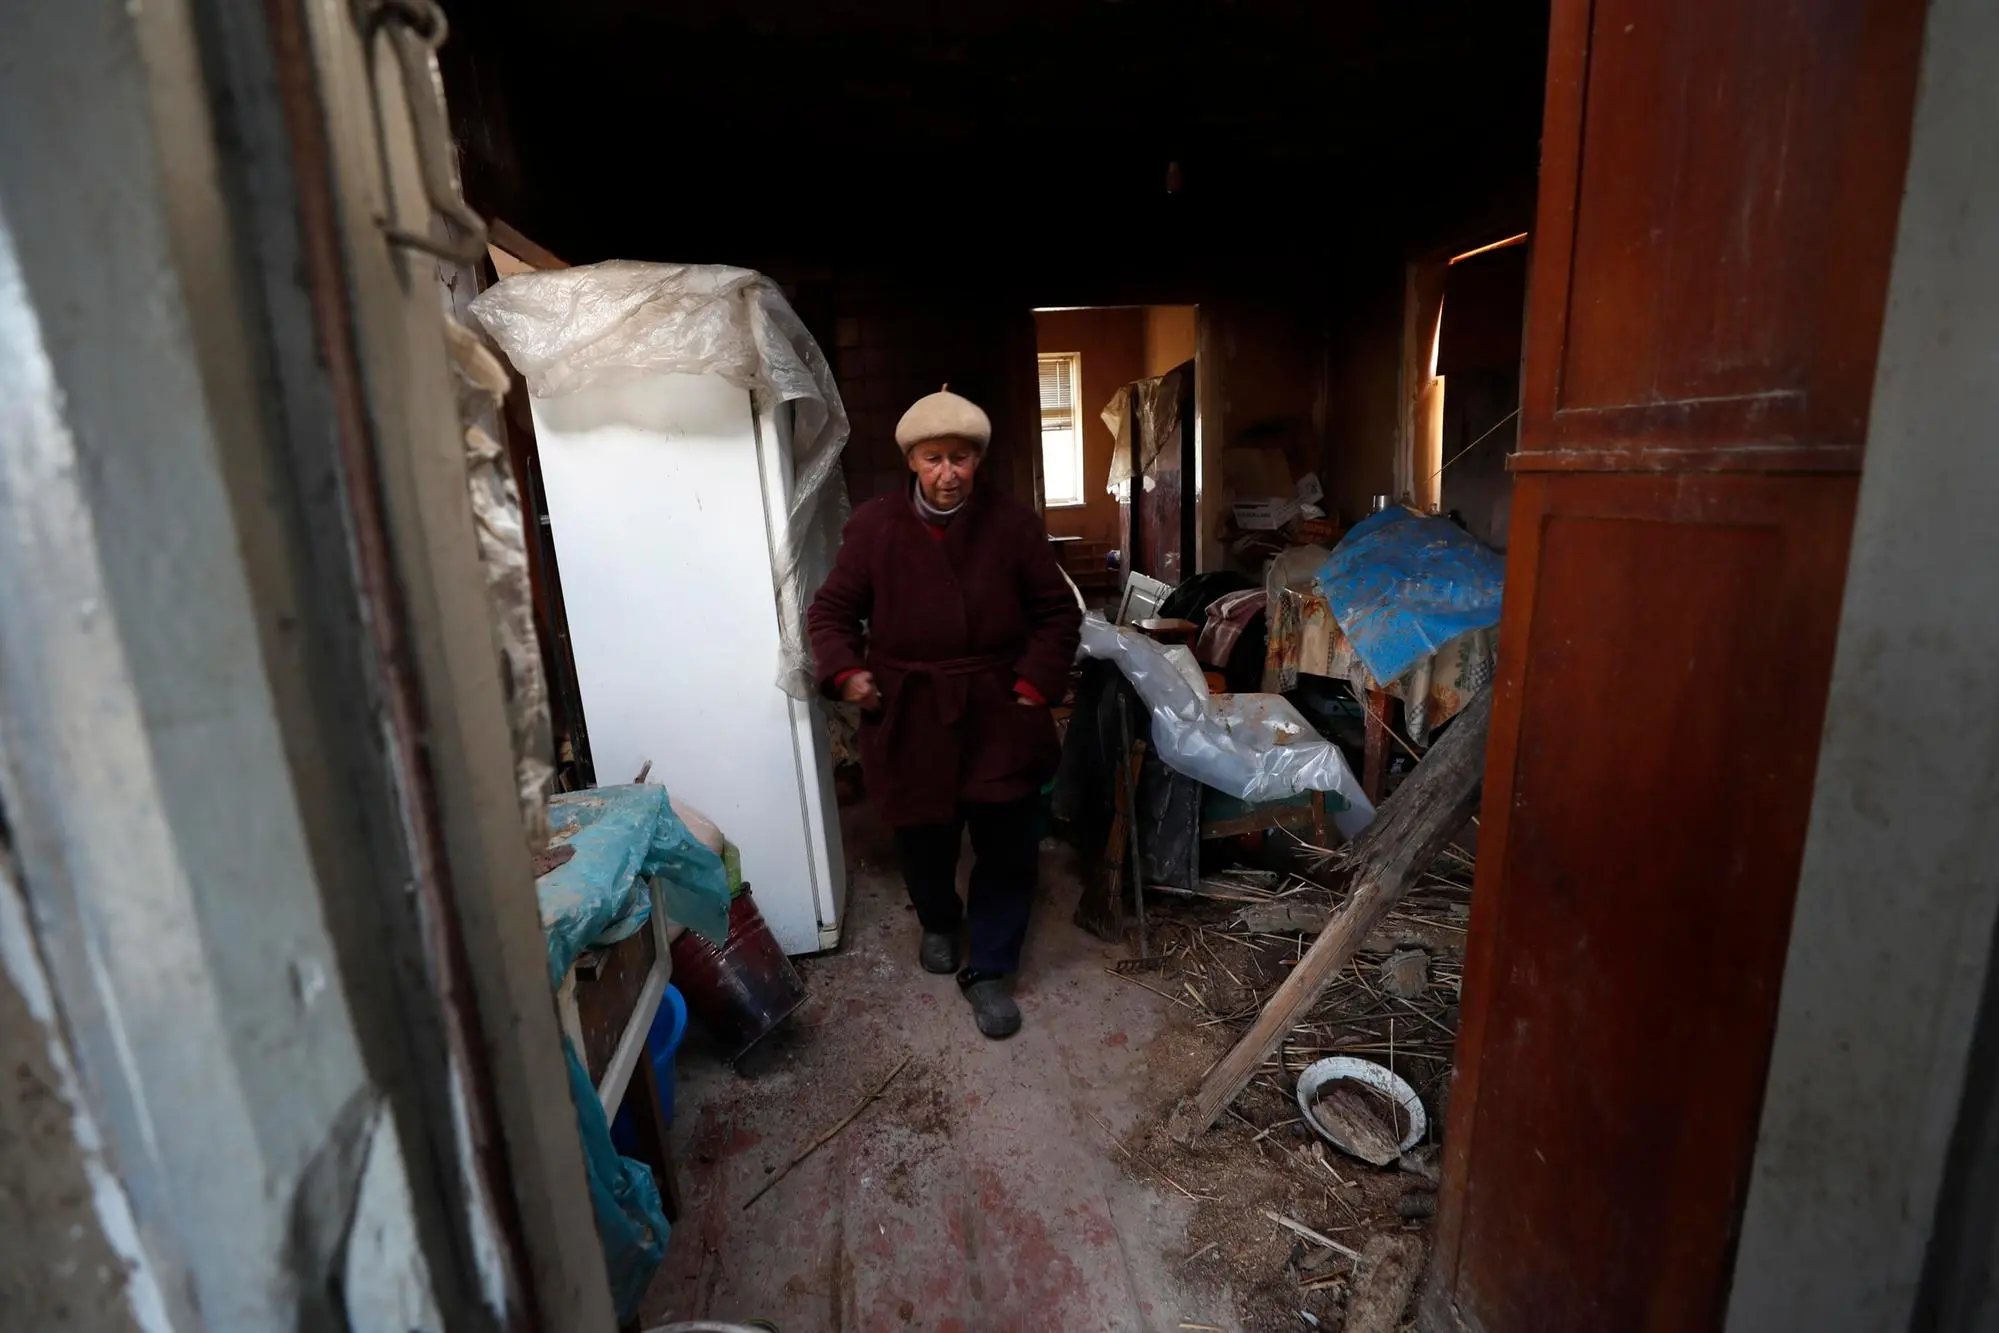 epa10241464 Ukrainian Lyudmila, 77, shows her destroyed house that she is still leaving in, in the city of Izyum, Kharkiv region, Ukraine, 13 October 2022. Kharkiv and surrounding areas have been the target of heavy shelling since February 2022, when Russian troops entered Ukraine territory starting a conflict that has provoked destruction and a humanitarian crisis. EPA/ATEF SAFADI